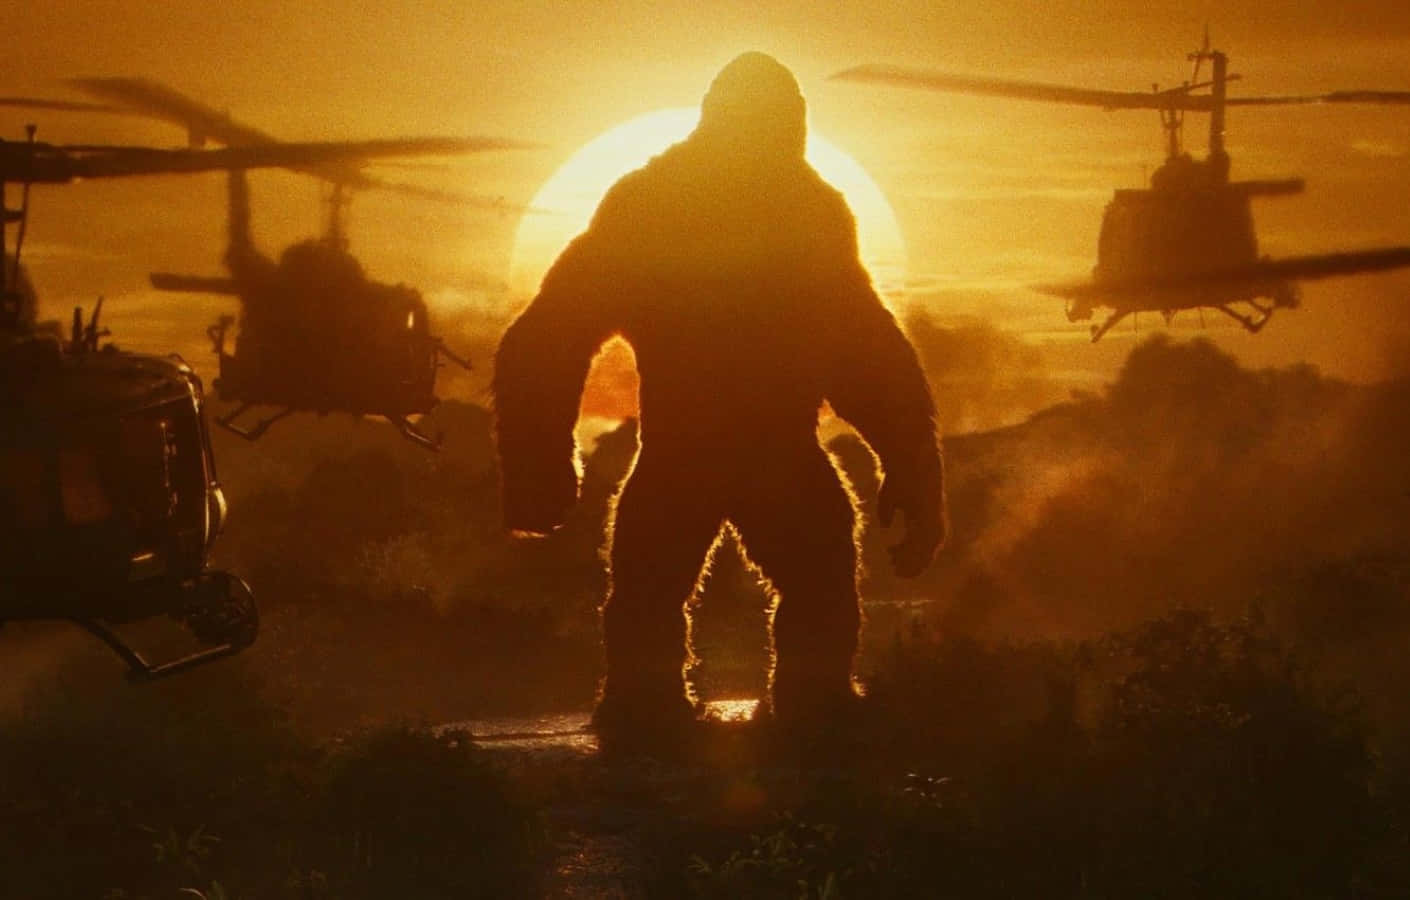 Majestic King Kong Standing Tall On A Mountain Peak Background